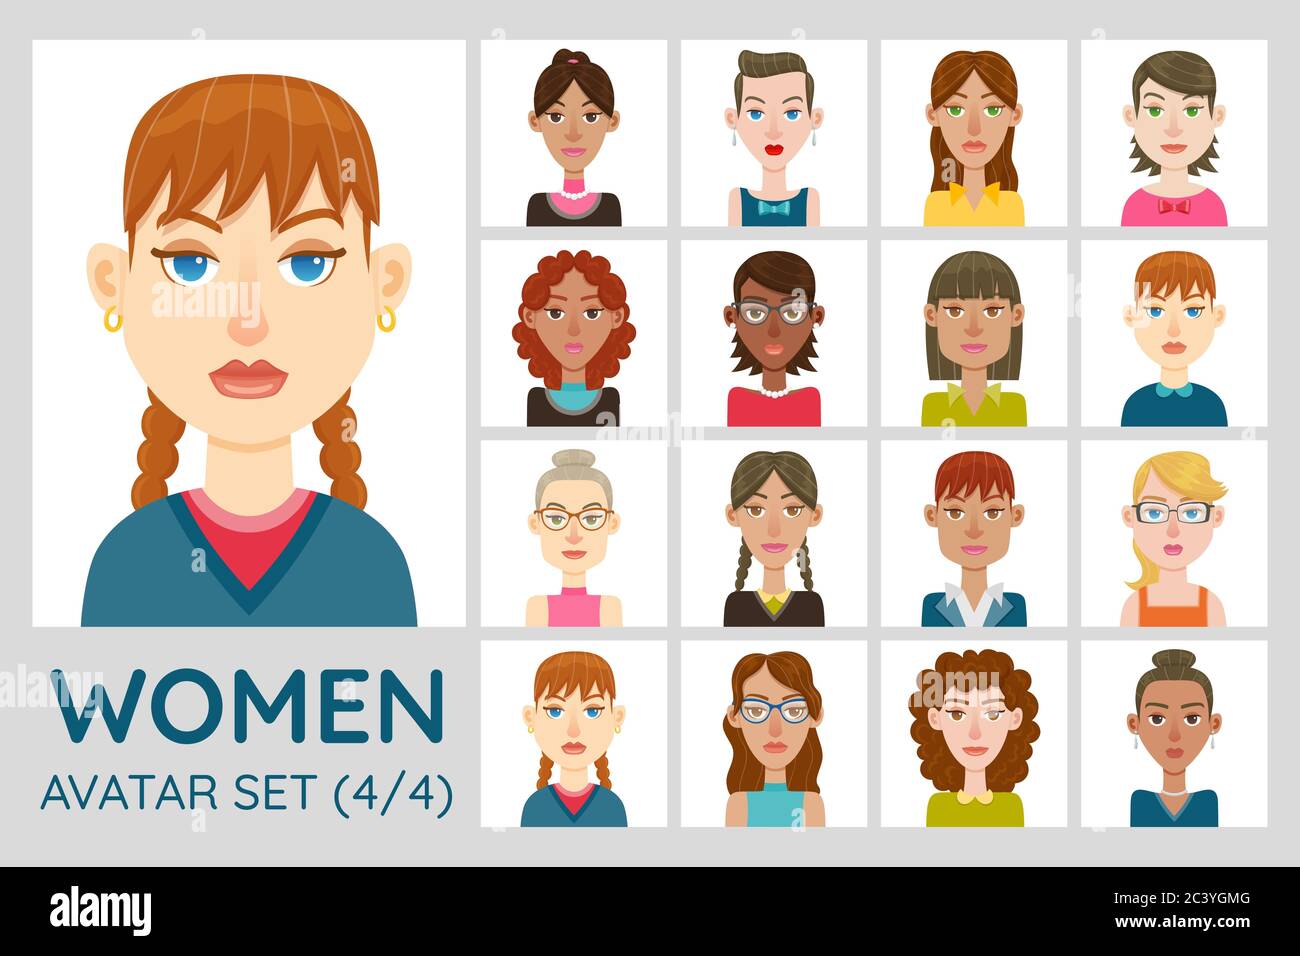 Female avatar set. Collection of 16 avatars with different hairstyles, face shapes, skin color and clothing. Set 1 of 4. Stock Vector